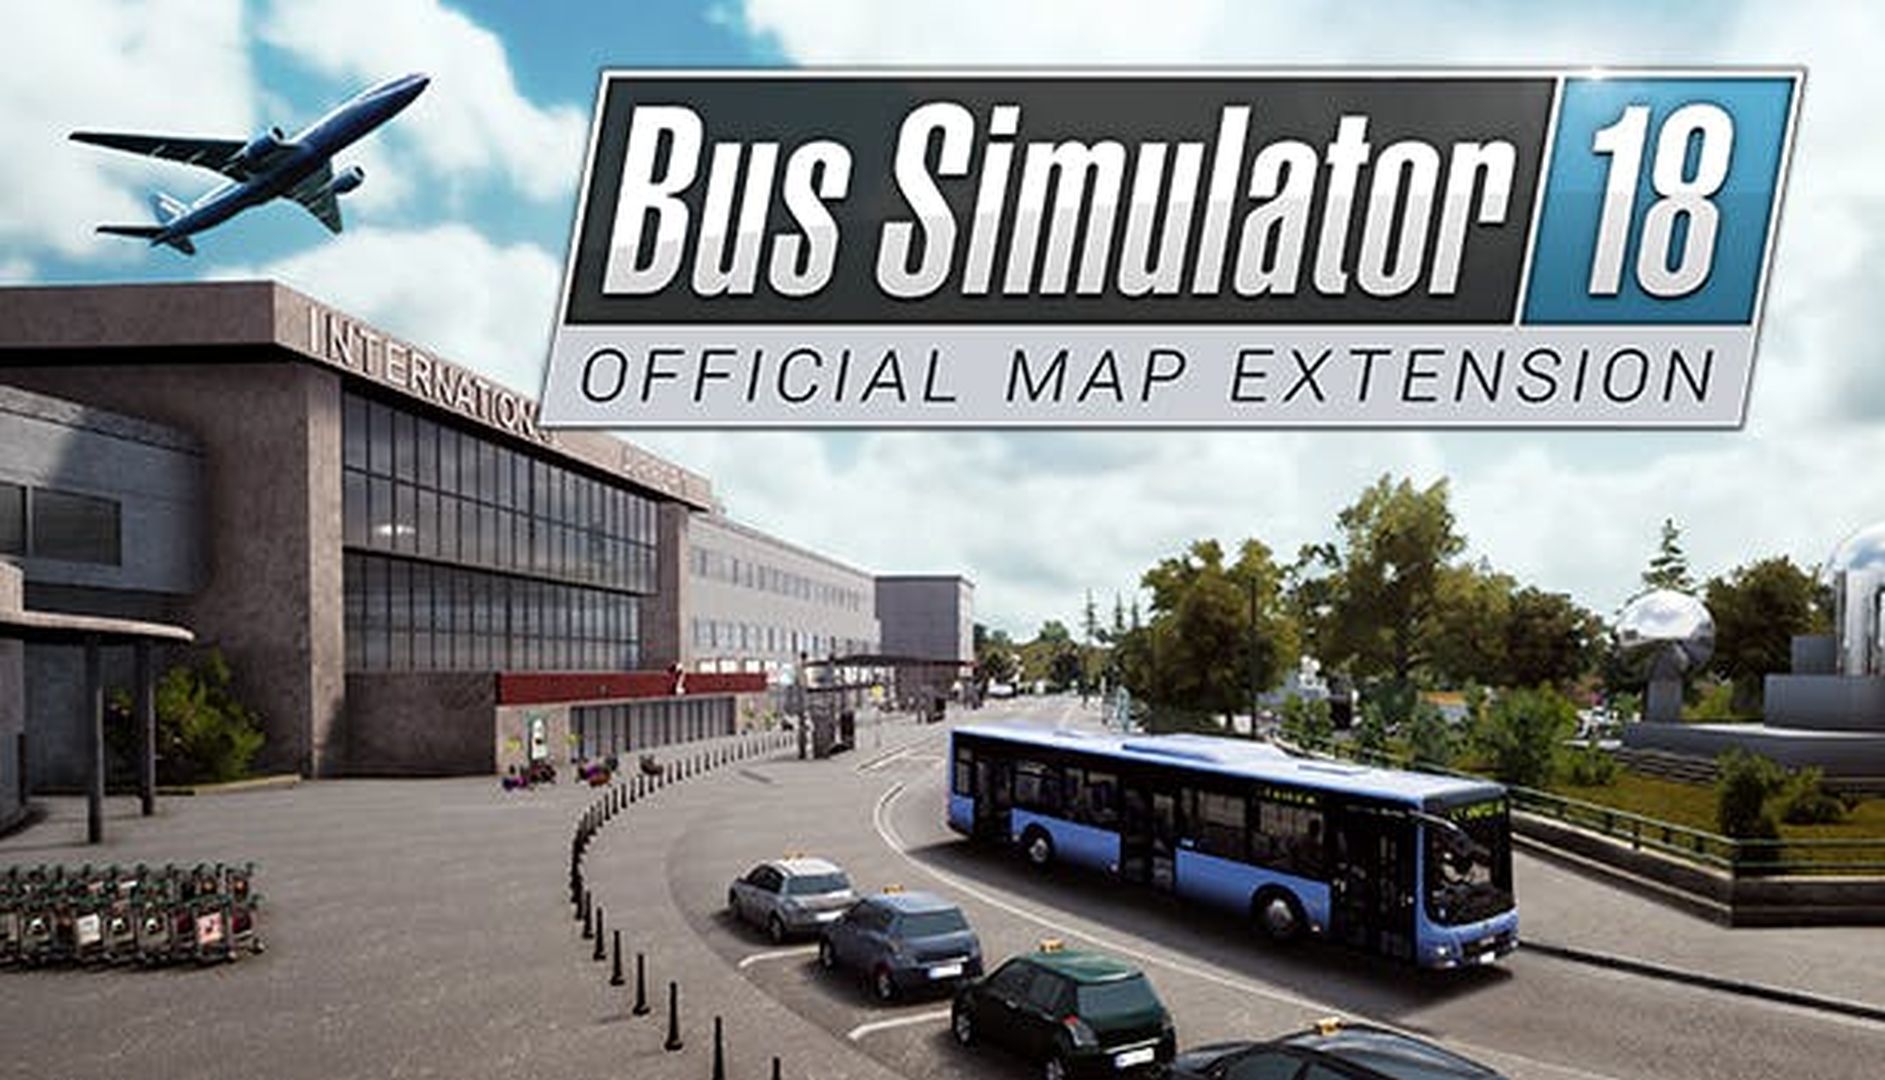 bus simulator 18 free download for android